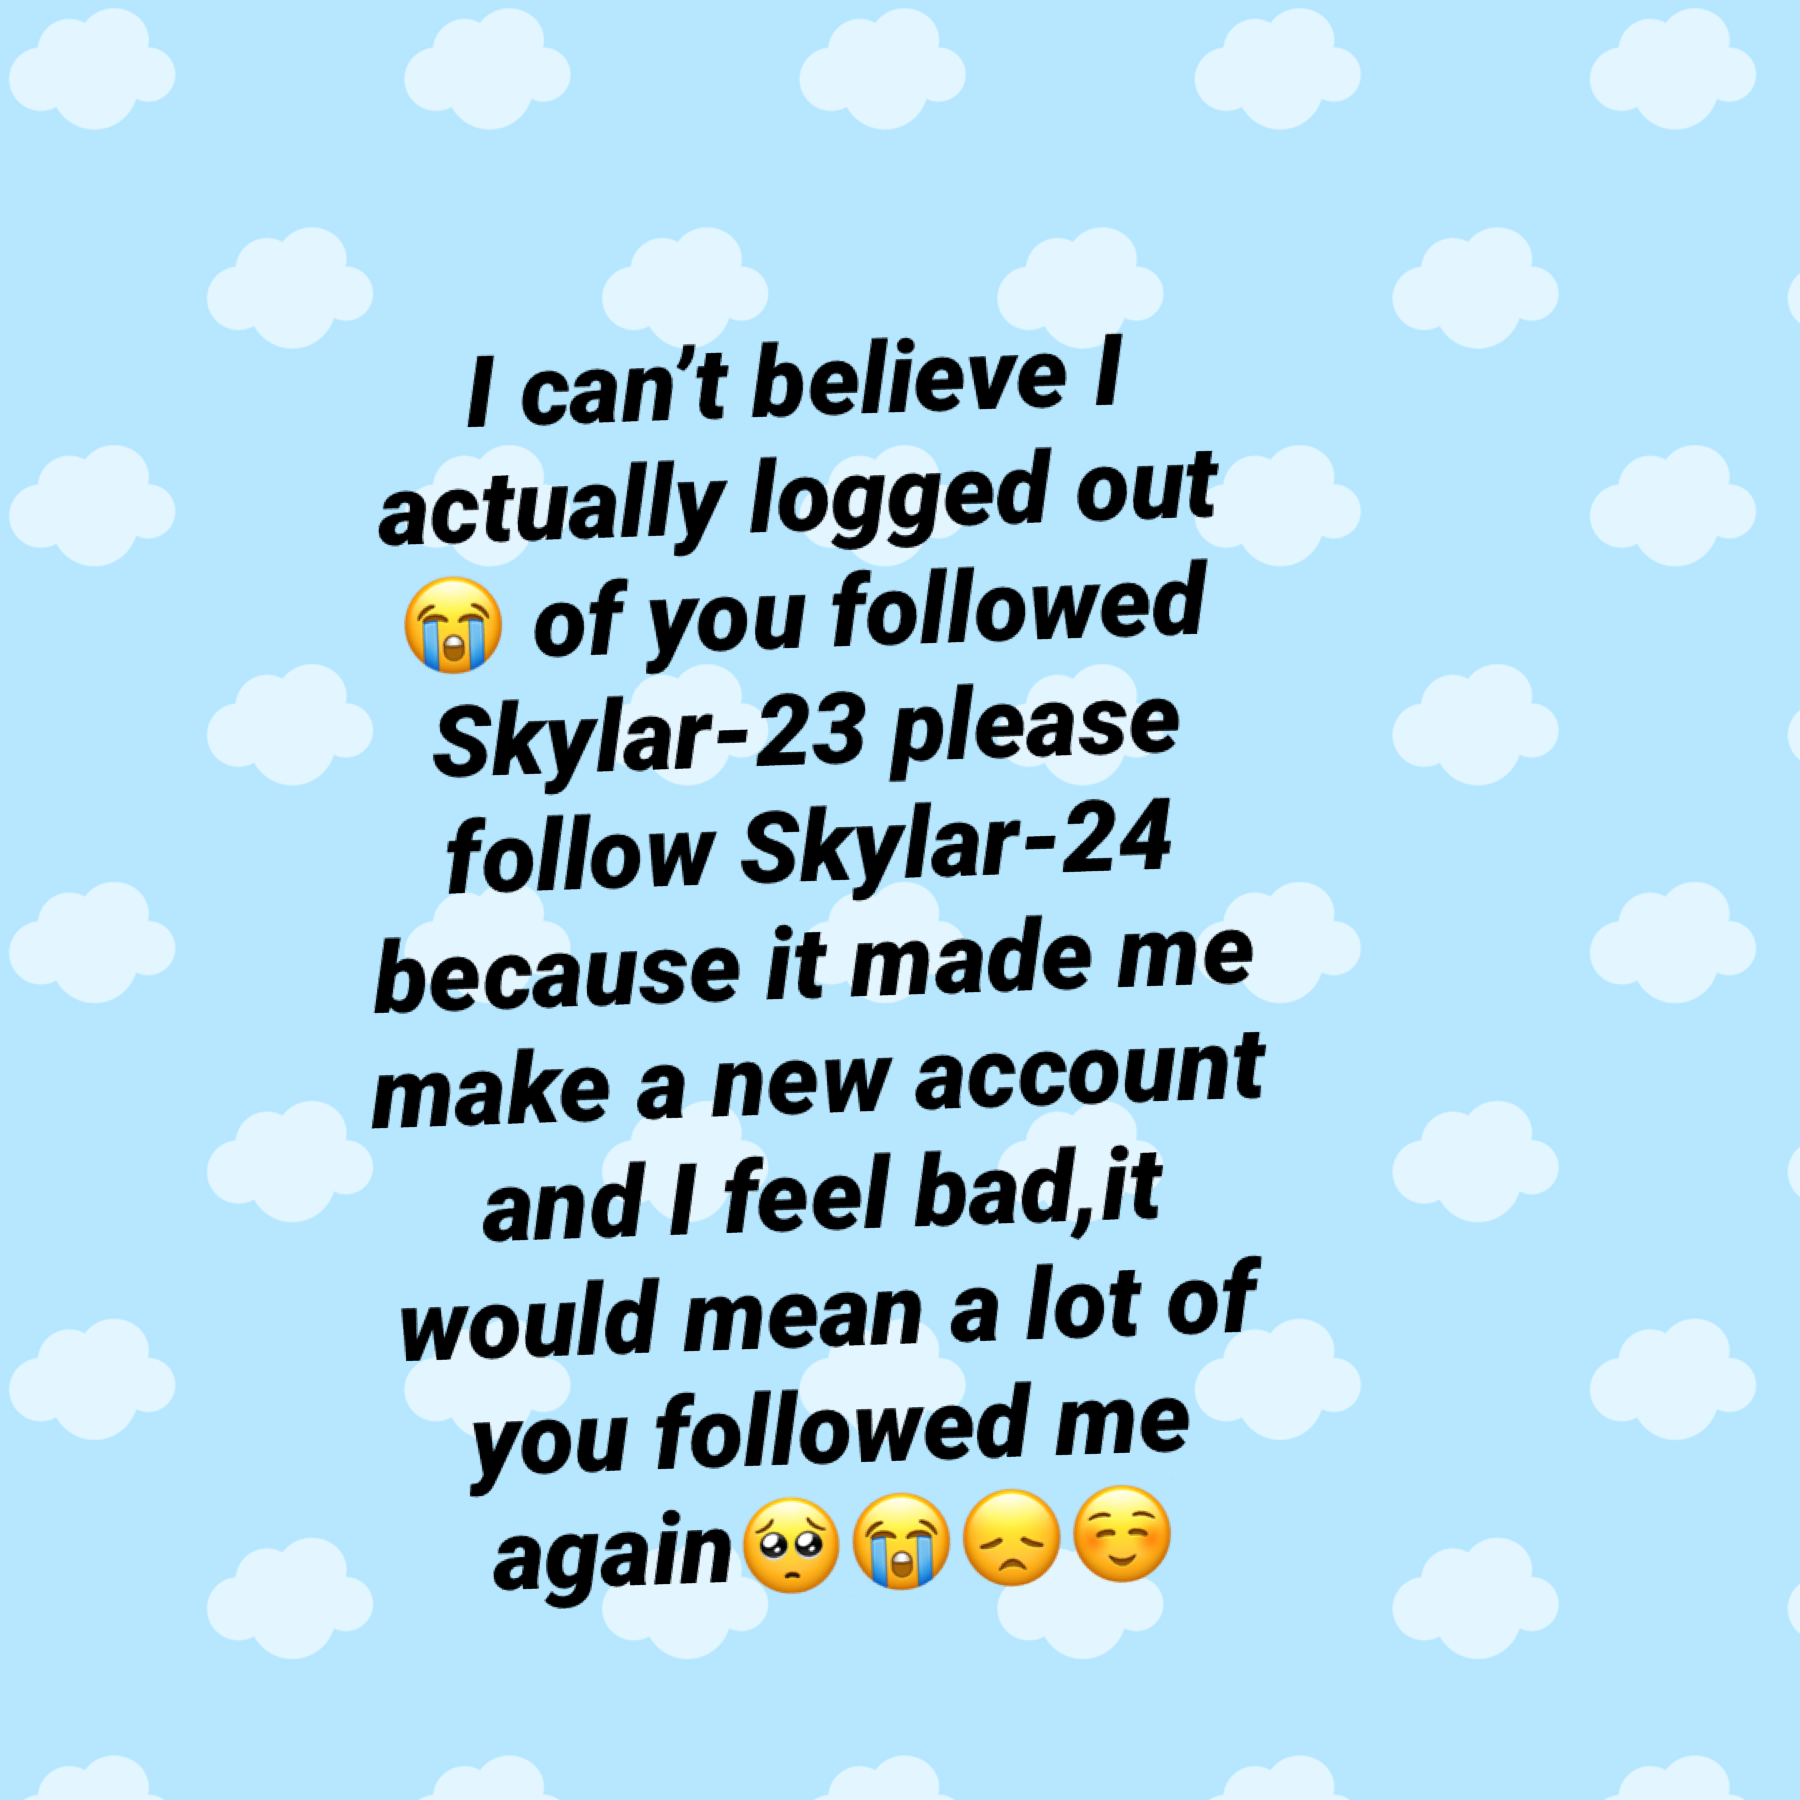 Tap 

Please I would cry if I didn’t get my 30 followers back